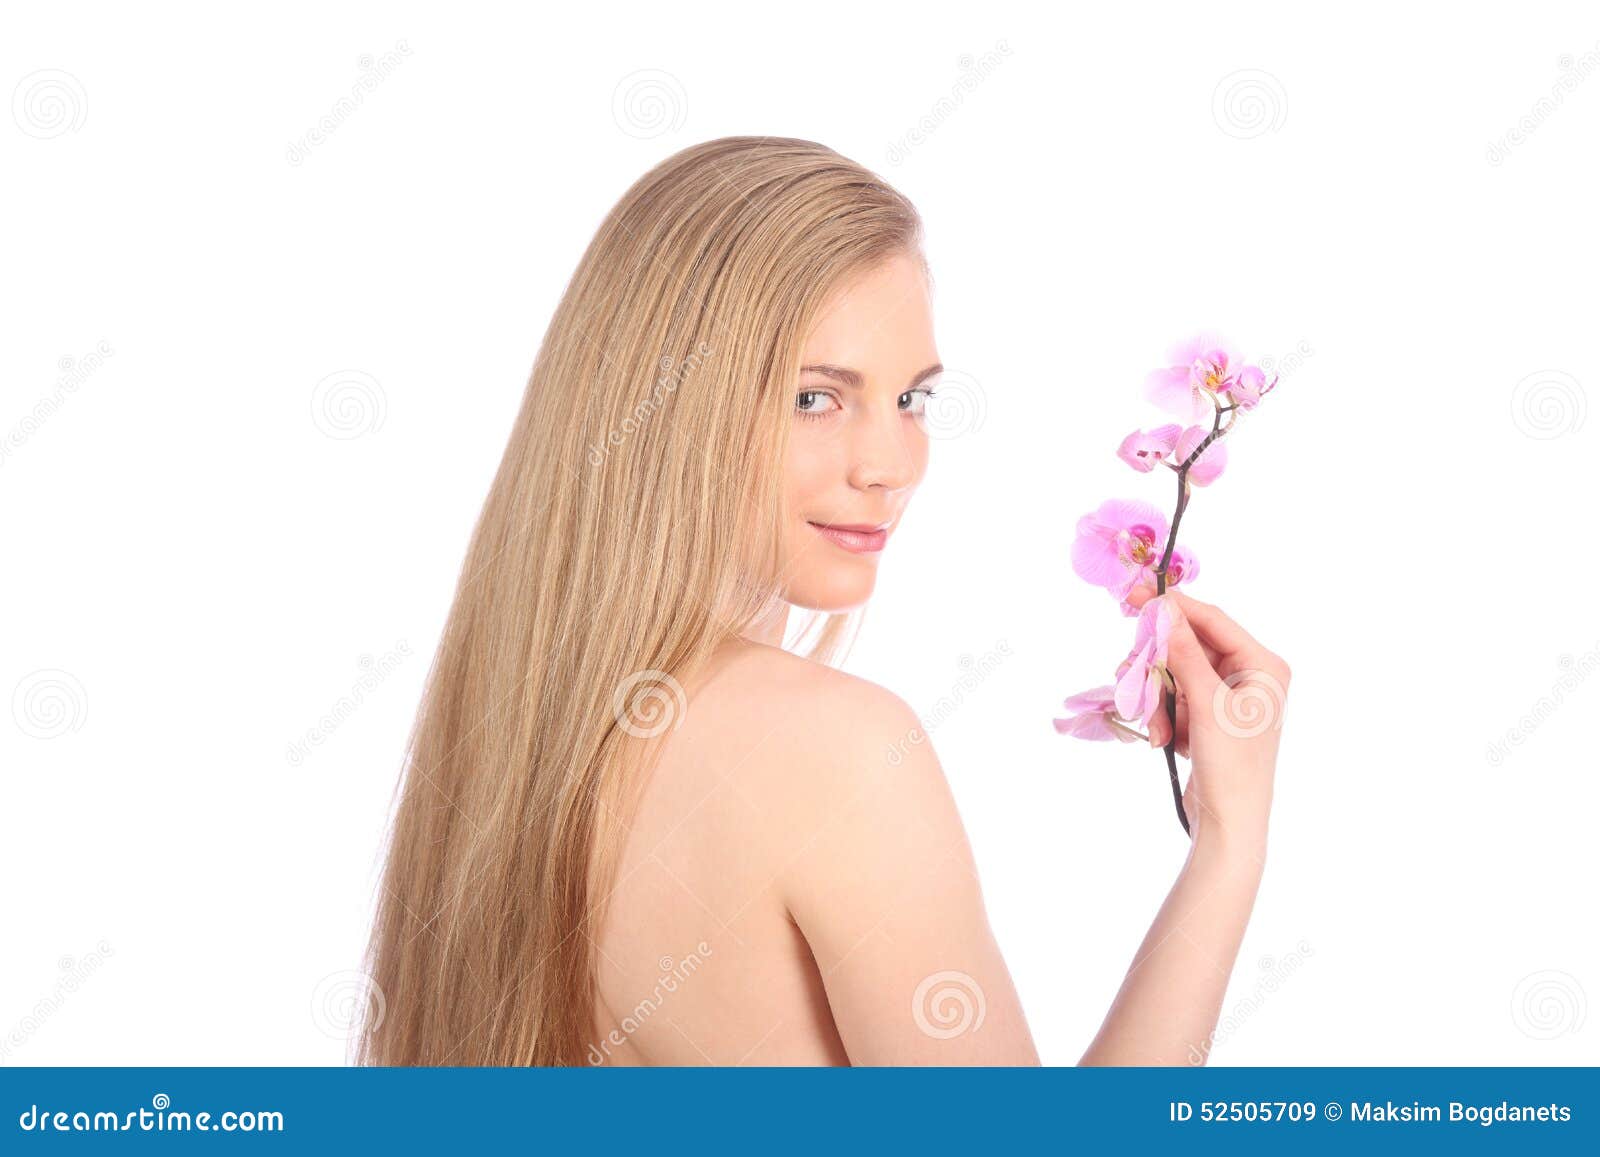 Beautiful Spa Girl with Orchid Flowers Skincare Concept Stock Image - Image  of facial, brunette: 52505709